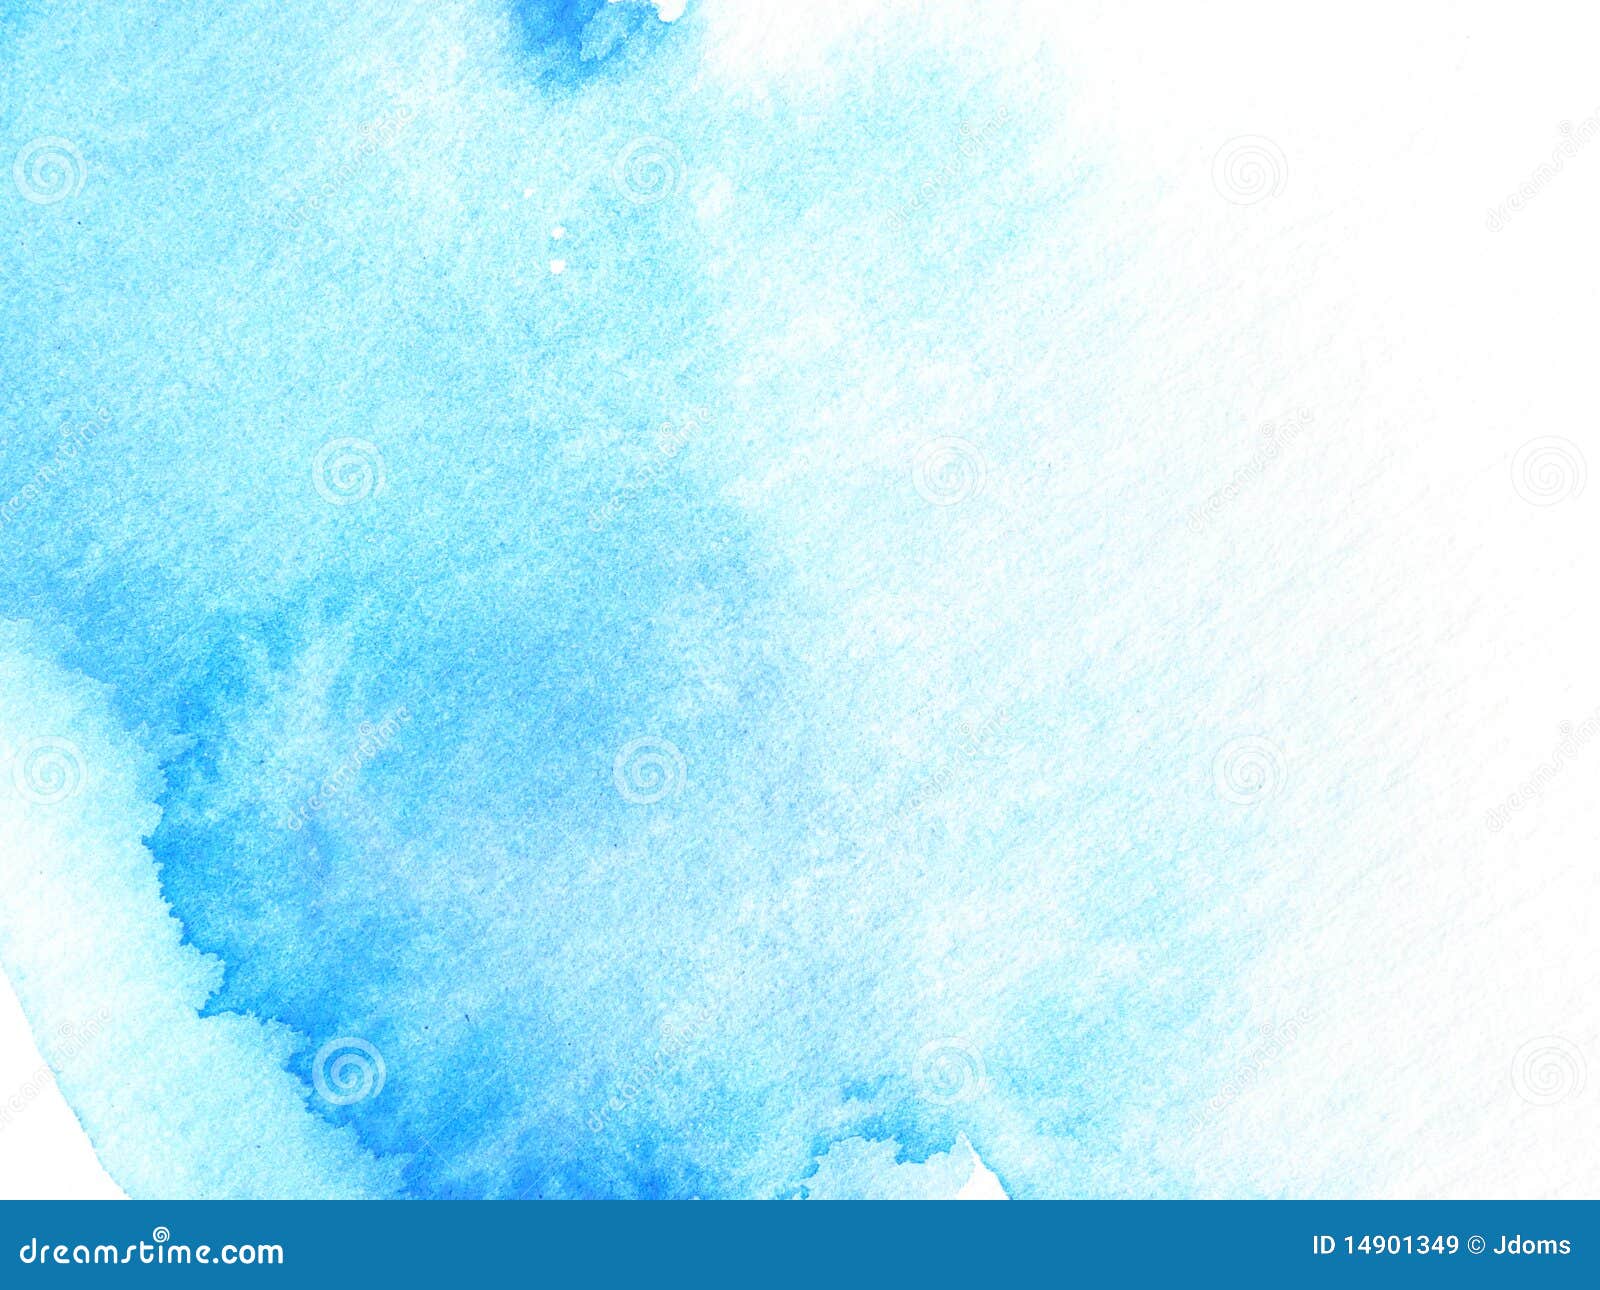 Blue Abstract Watercolor Background Design Paint Stock Image - Image of  unique, watercolor: 14901349